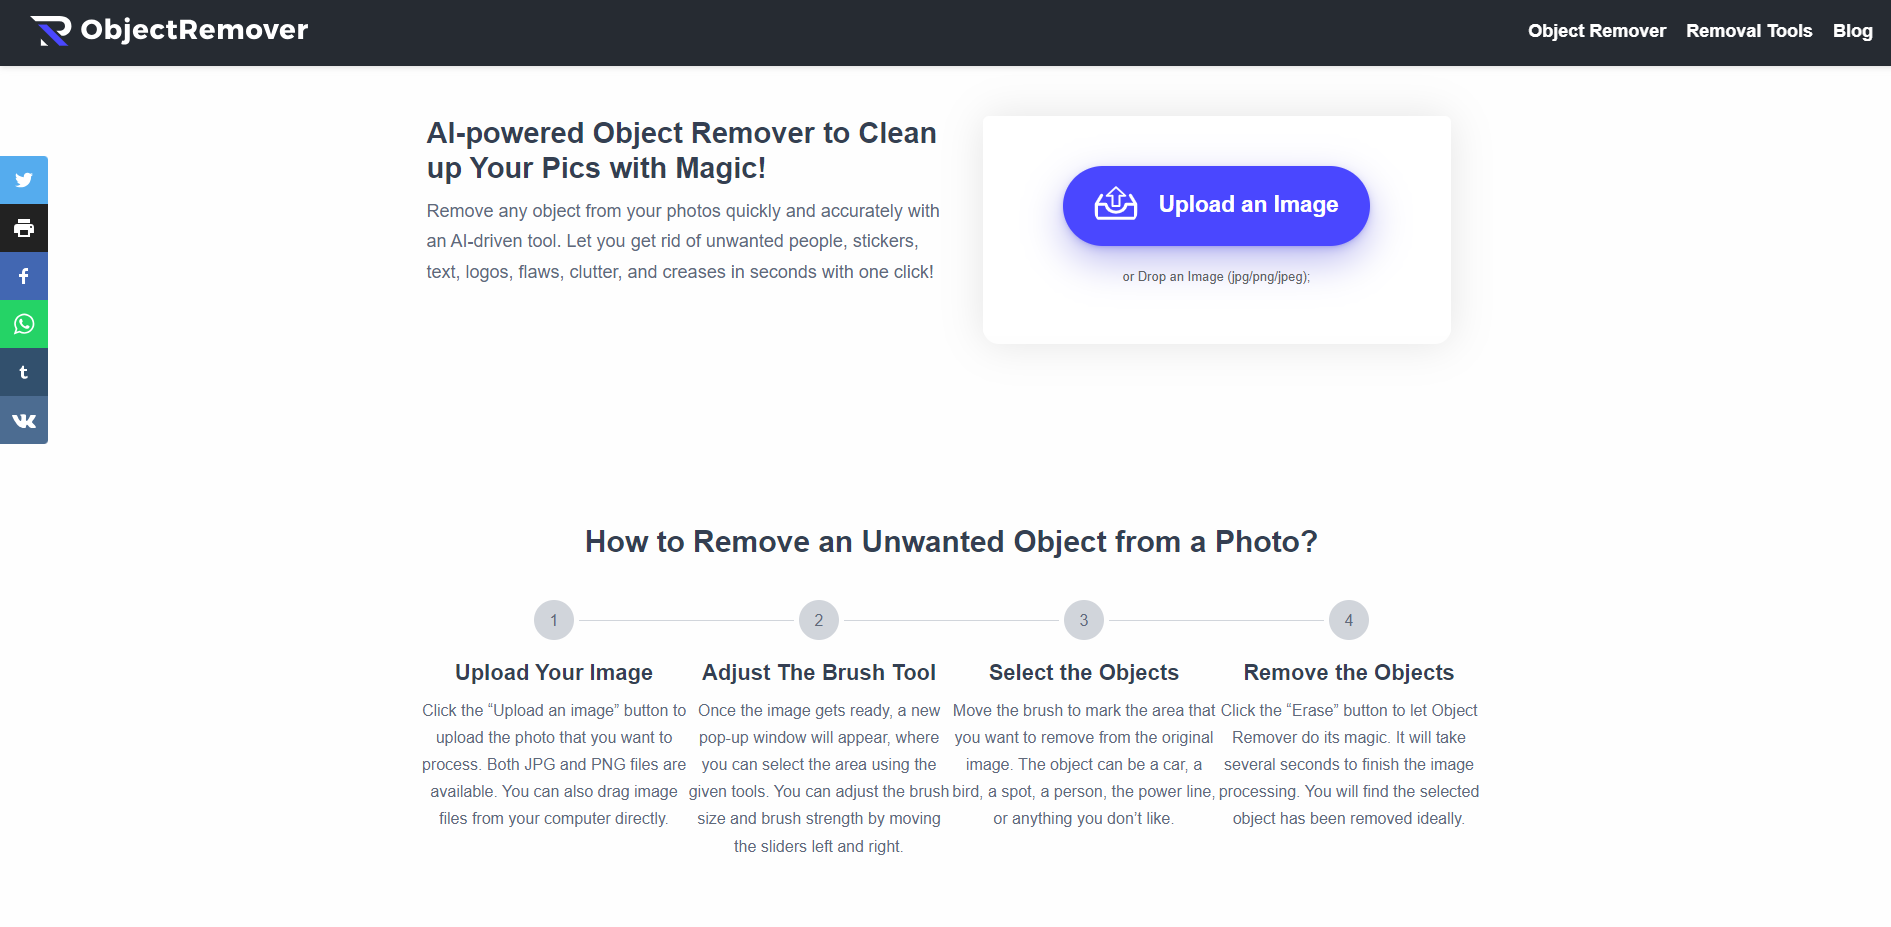 6 Tools to Easily Remove Unwanted Objects from Photos